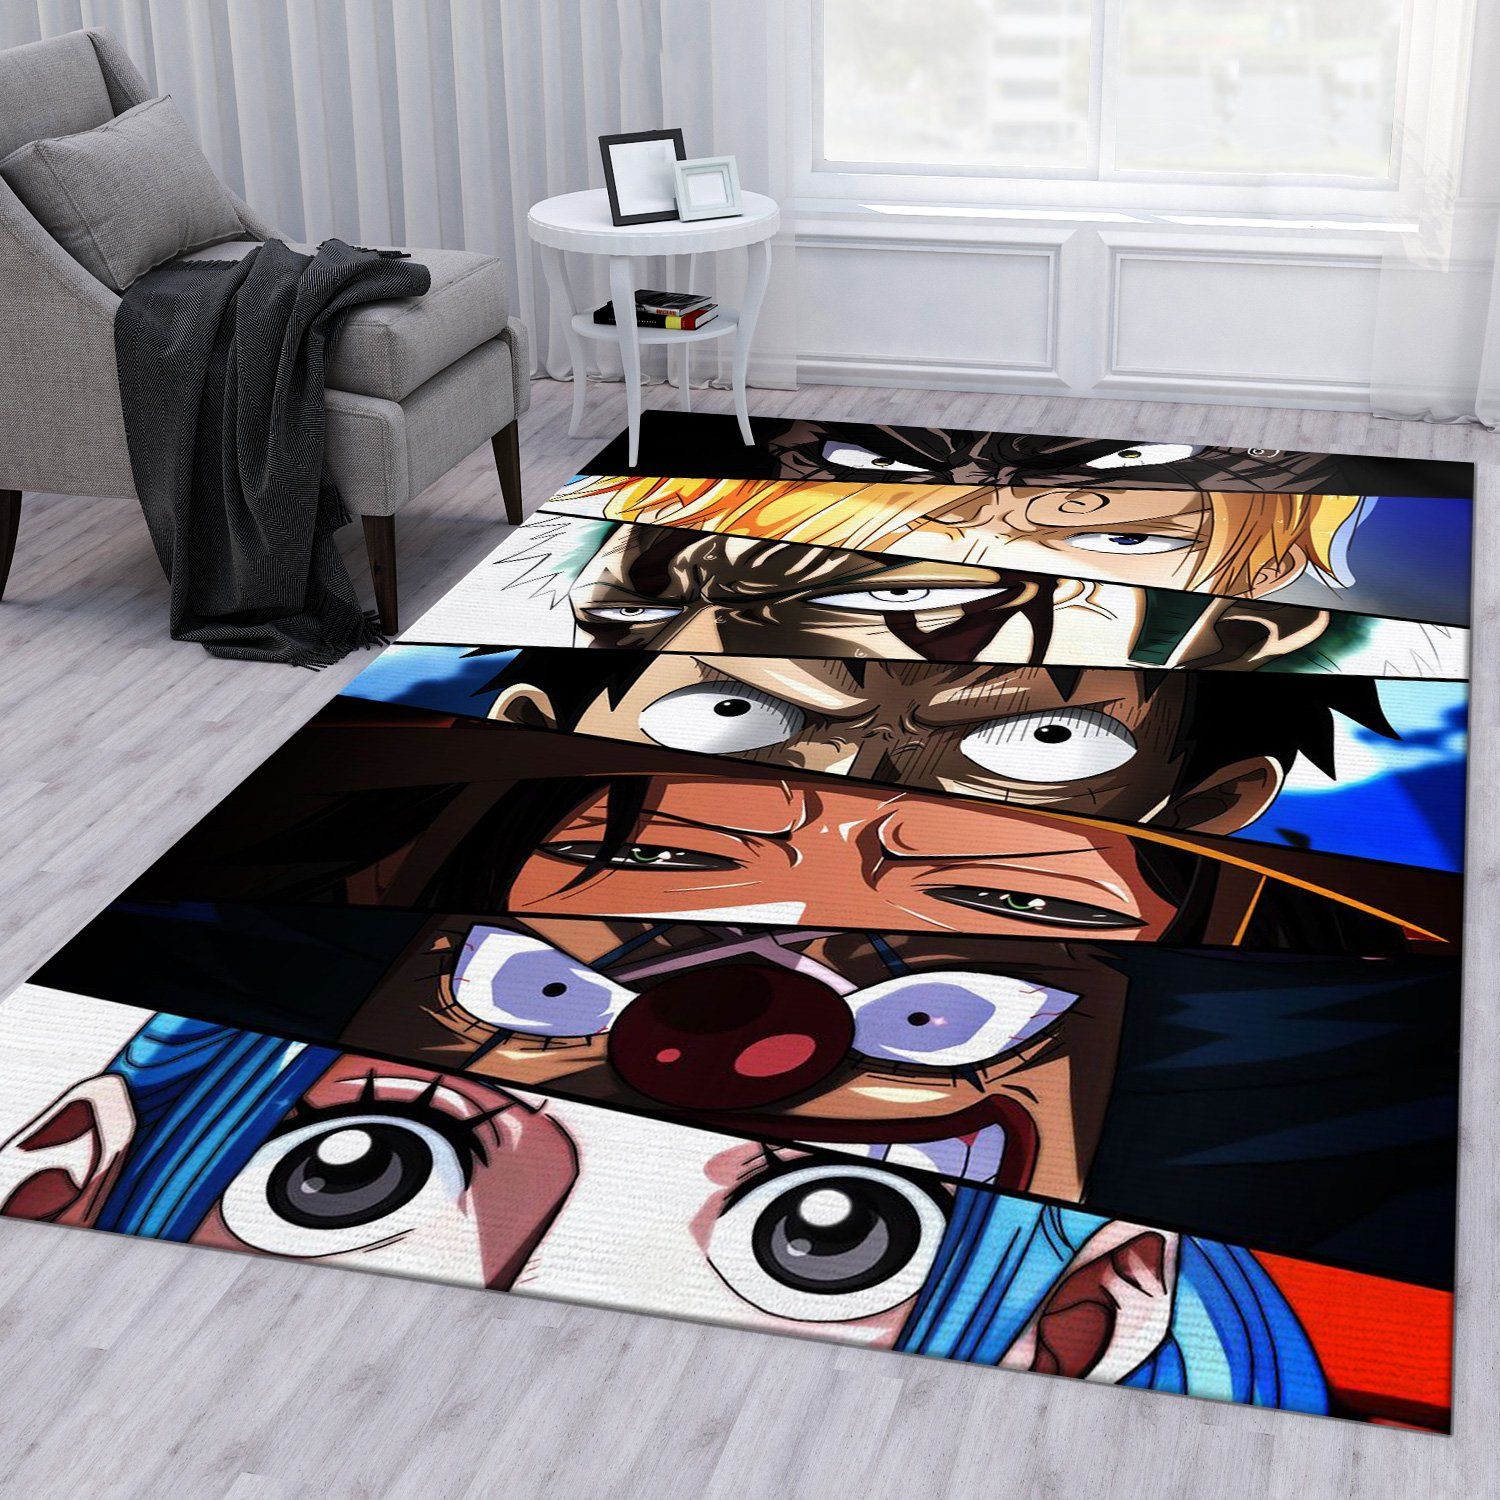 How To Make Anime Rugs | Special Thanks: d.s__studios  https://www.instagram.com/d.s__studios/ | By Tasty HomeFacebook